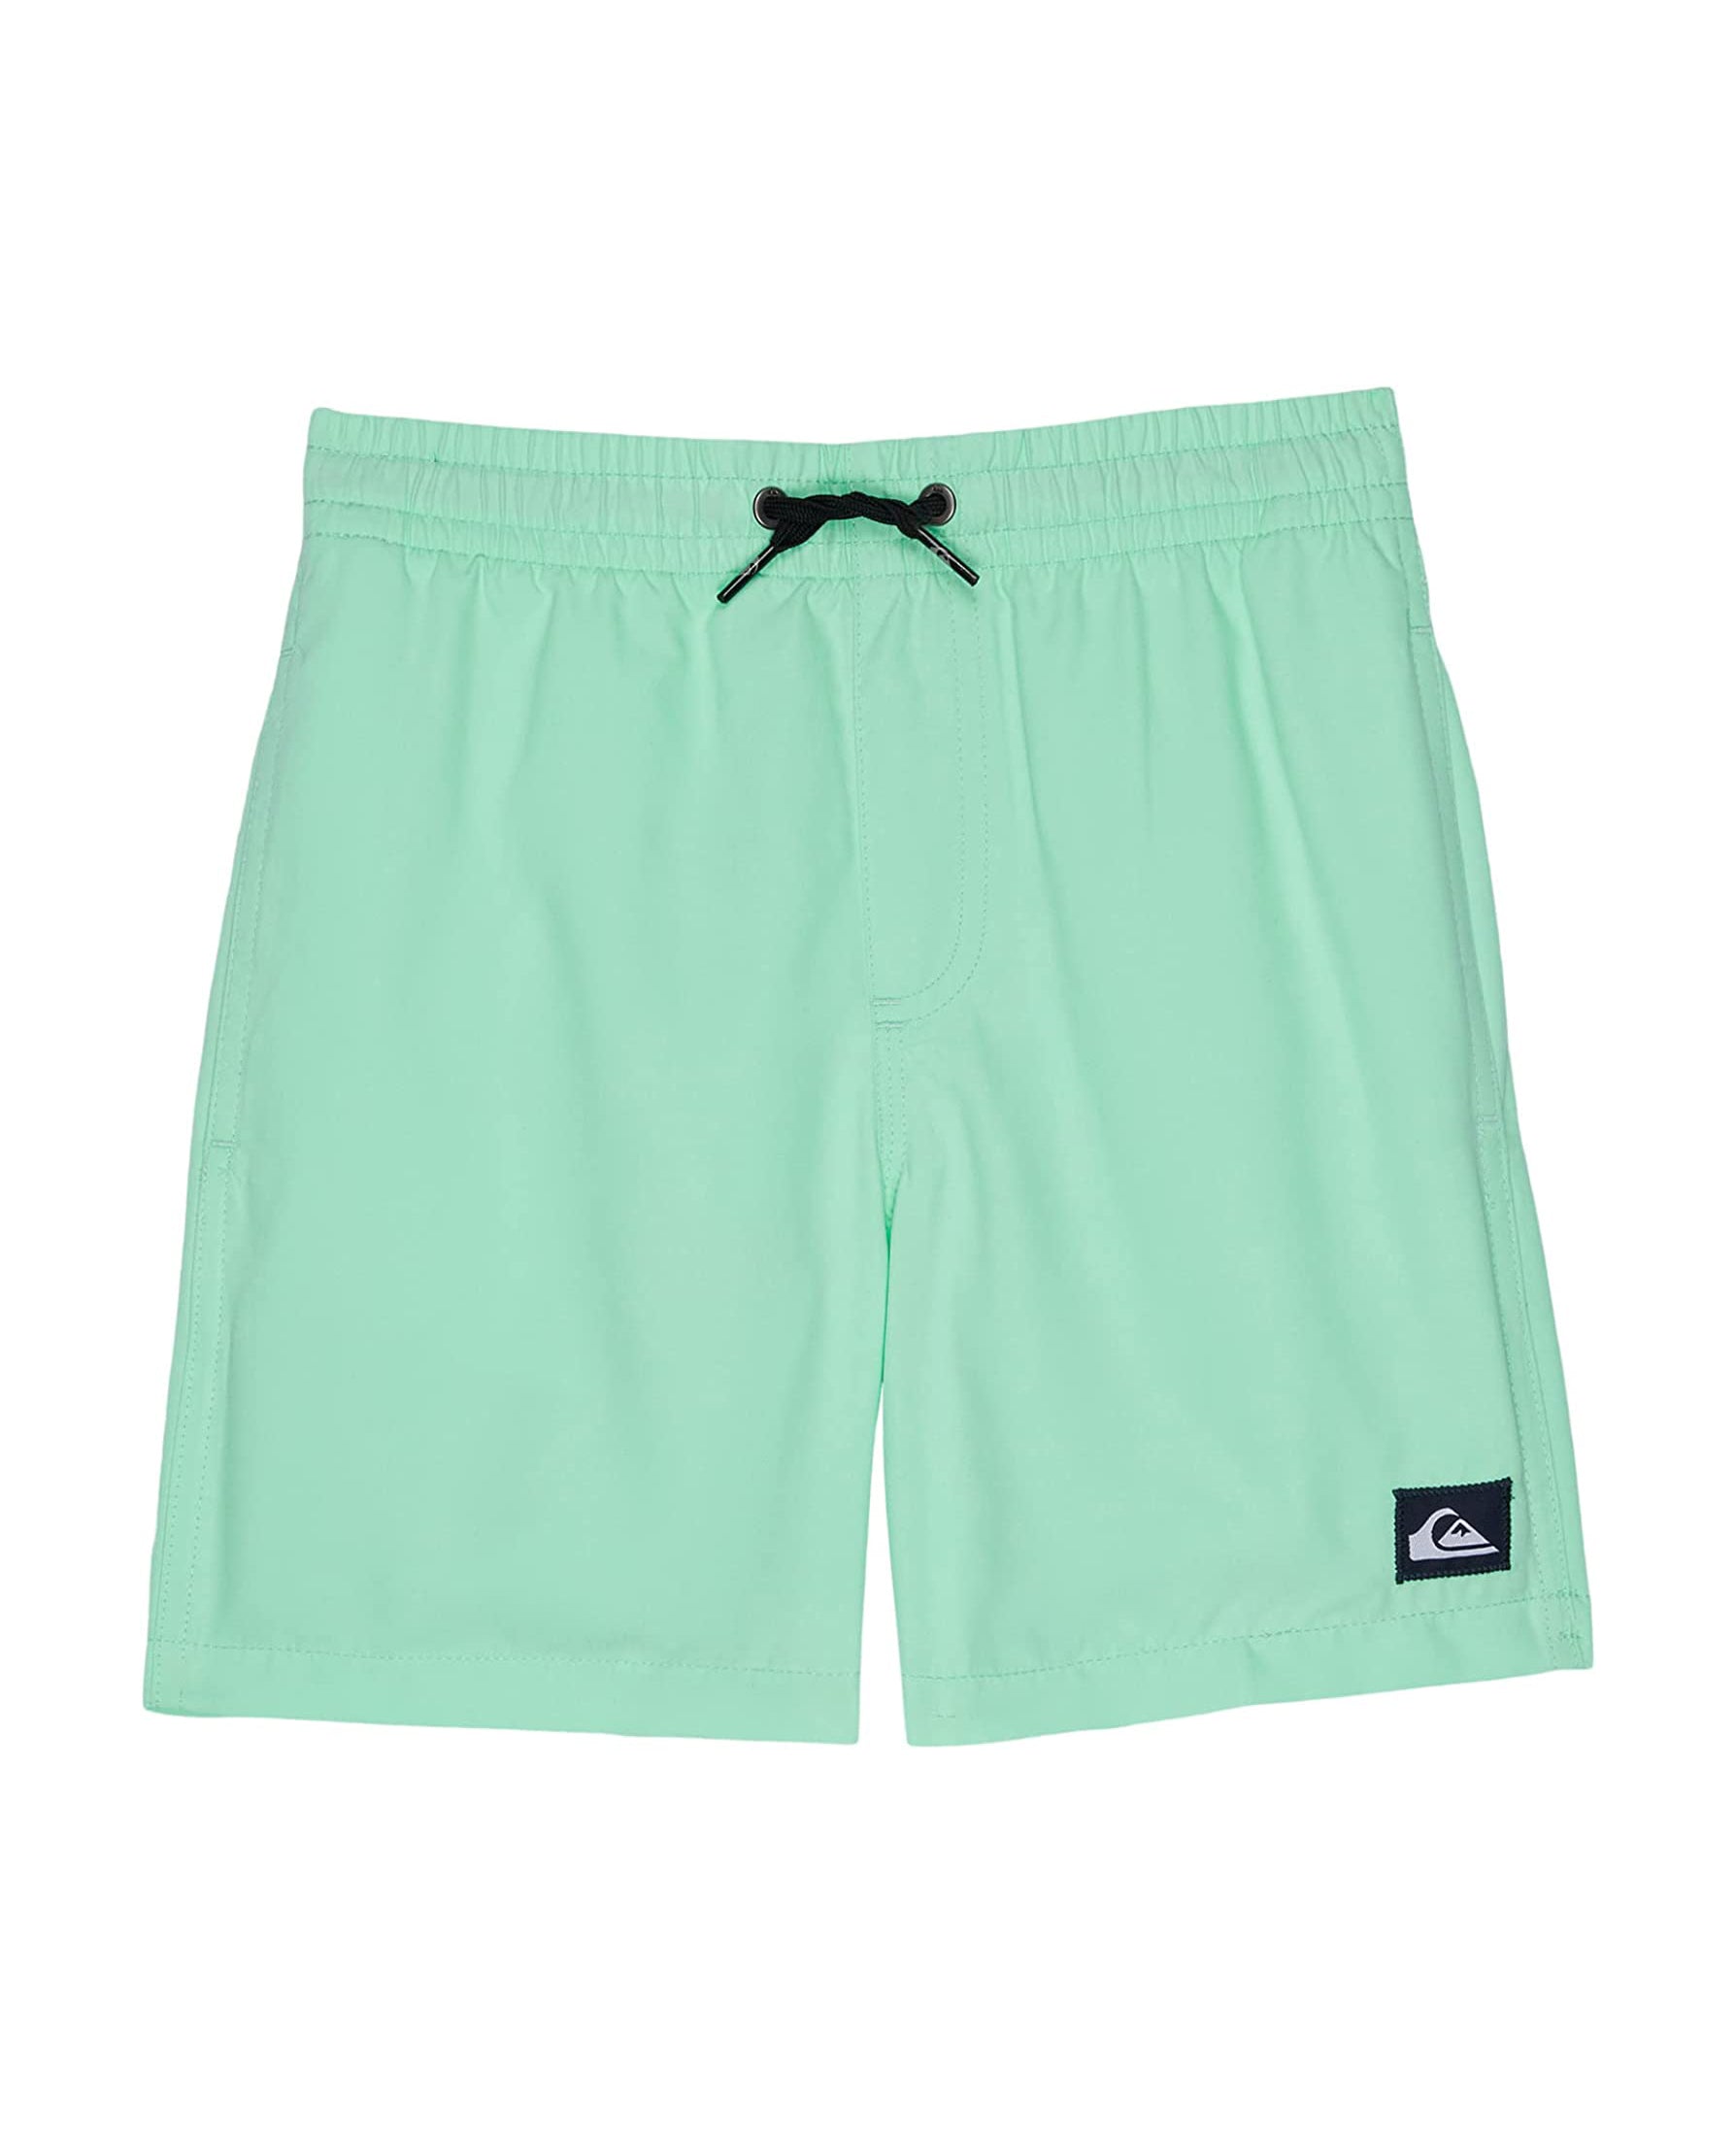 Quiksilver Boys 2-7 Mix Volley GCZ0 6